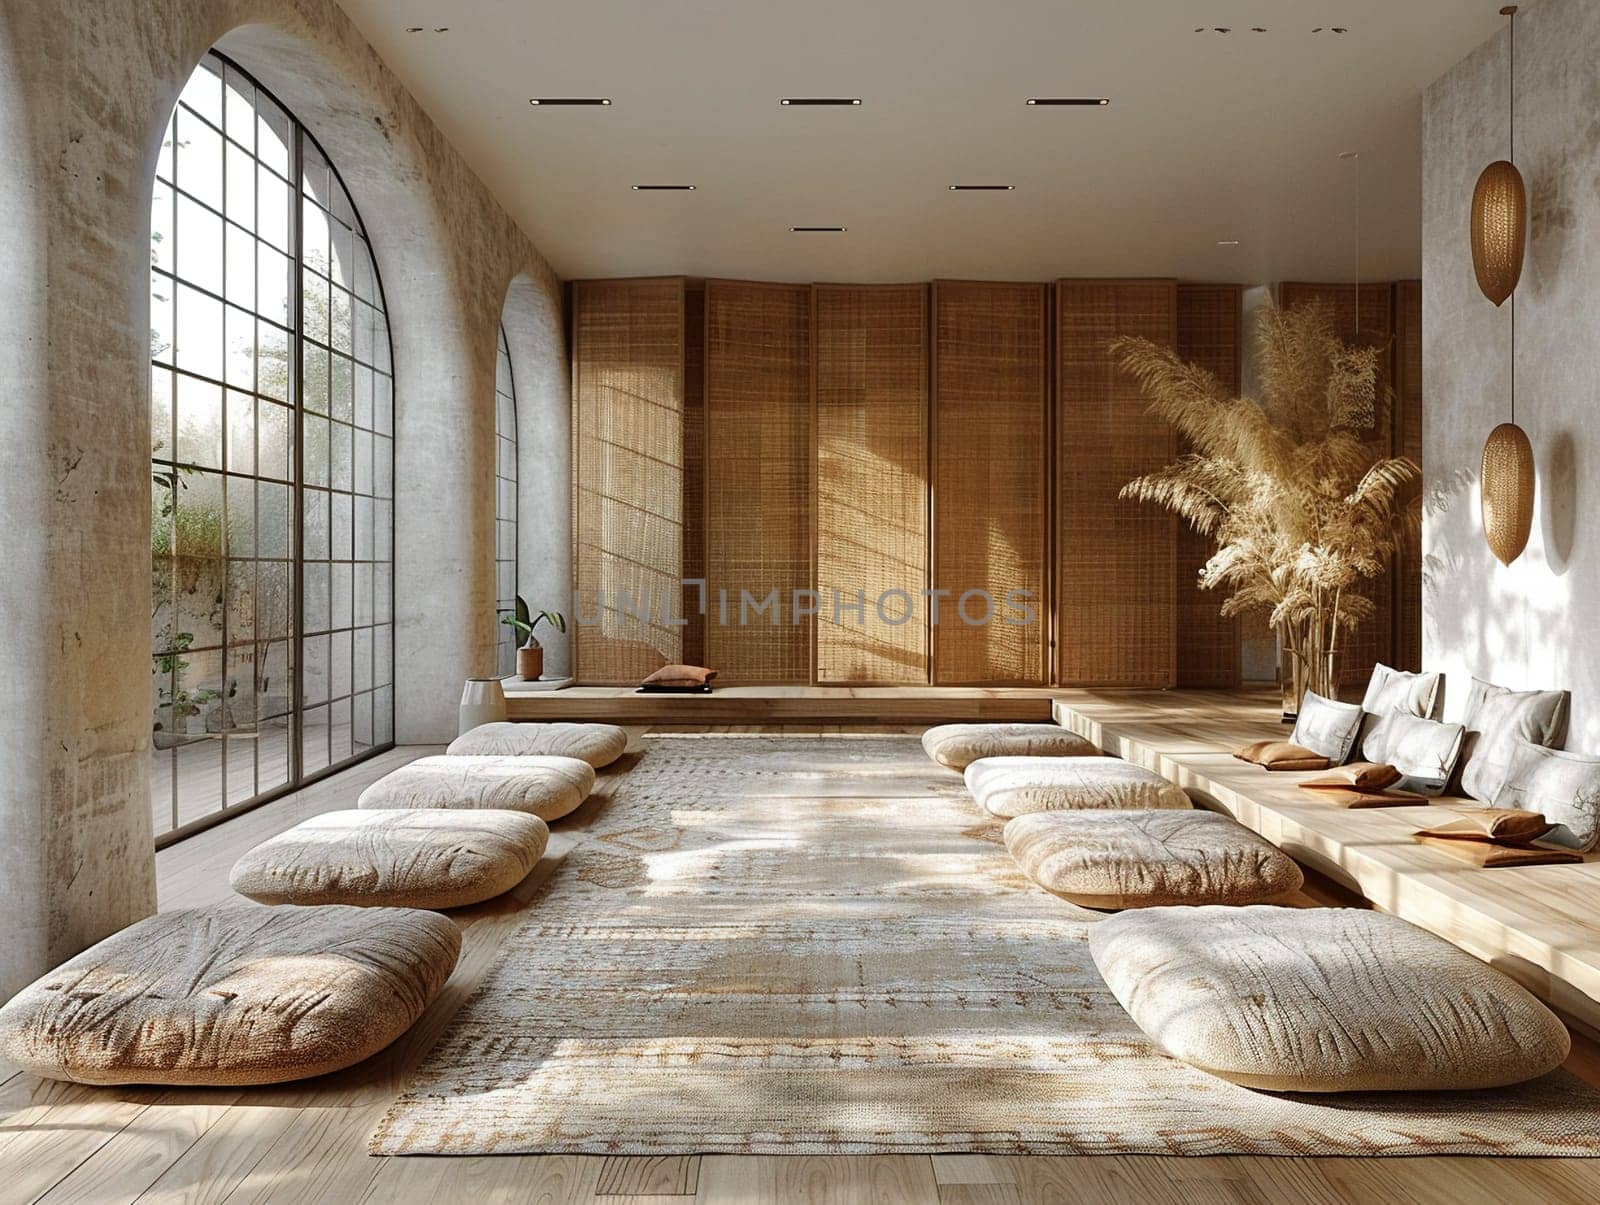 Minimalist meditation space with simple lines and a sense of calm